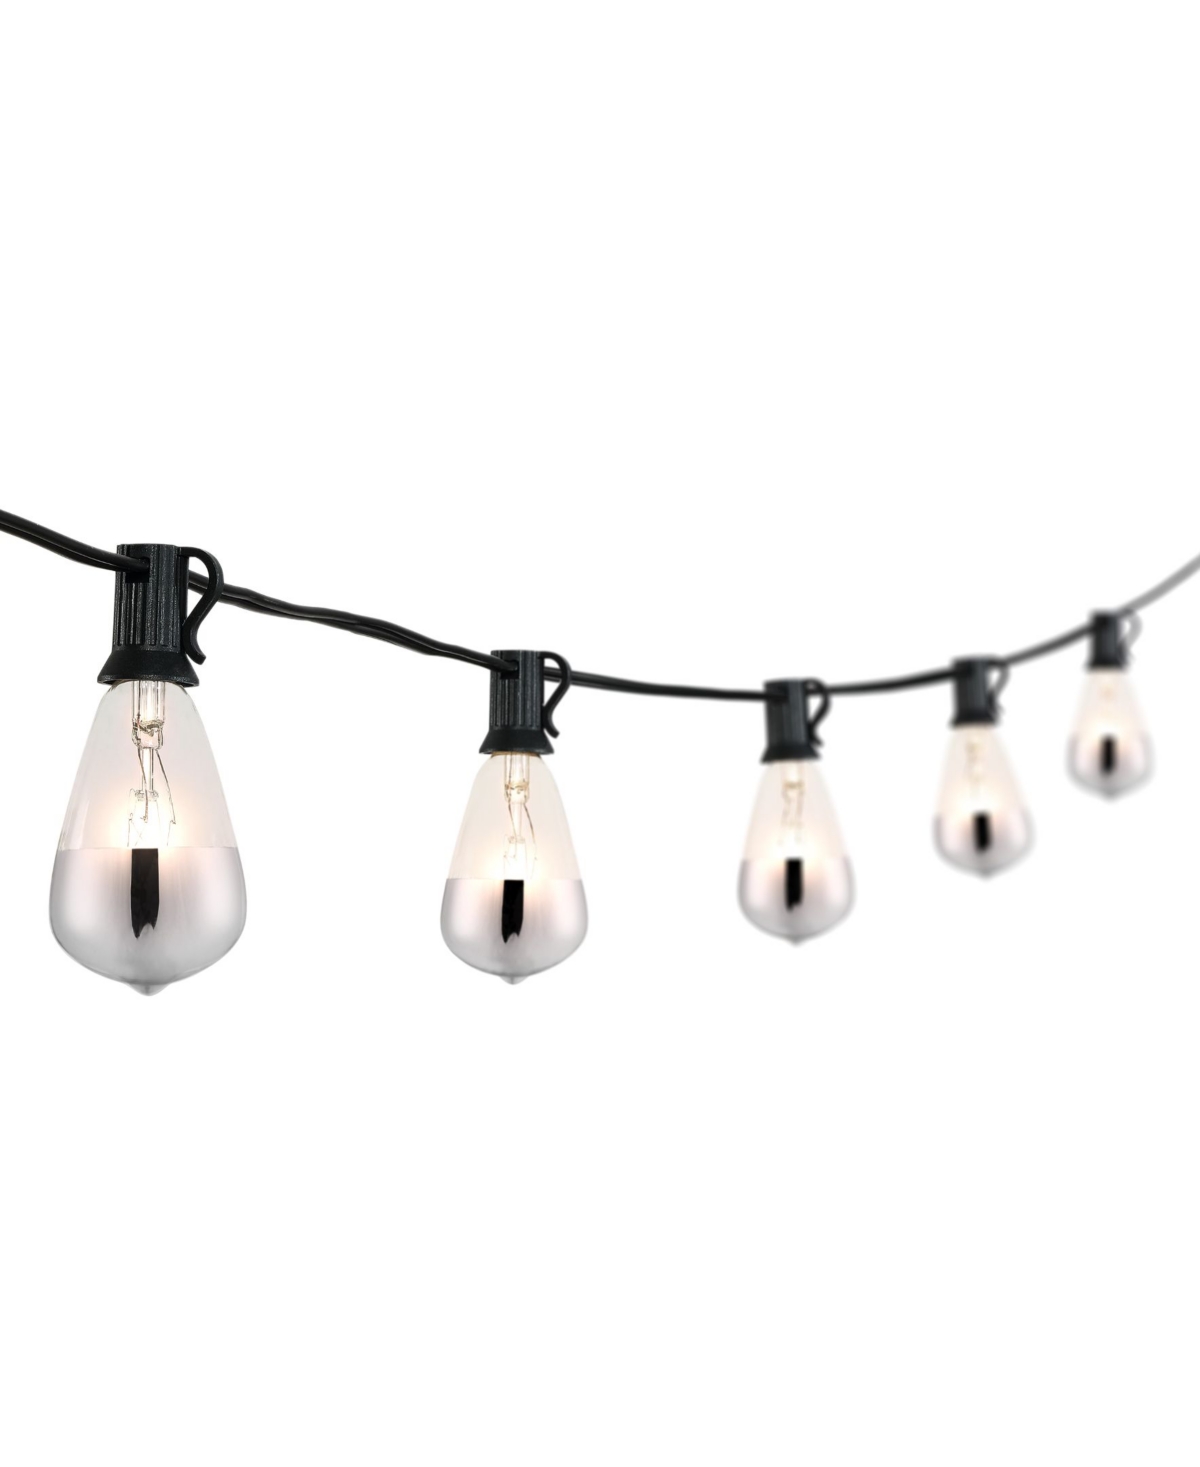 Jonathan Y 10-light Indoor And Outdoor Rustic Industrial Incandescent C7 Half-chrome Bulb String Lights In Black